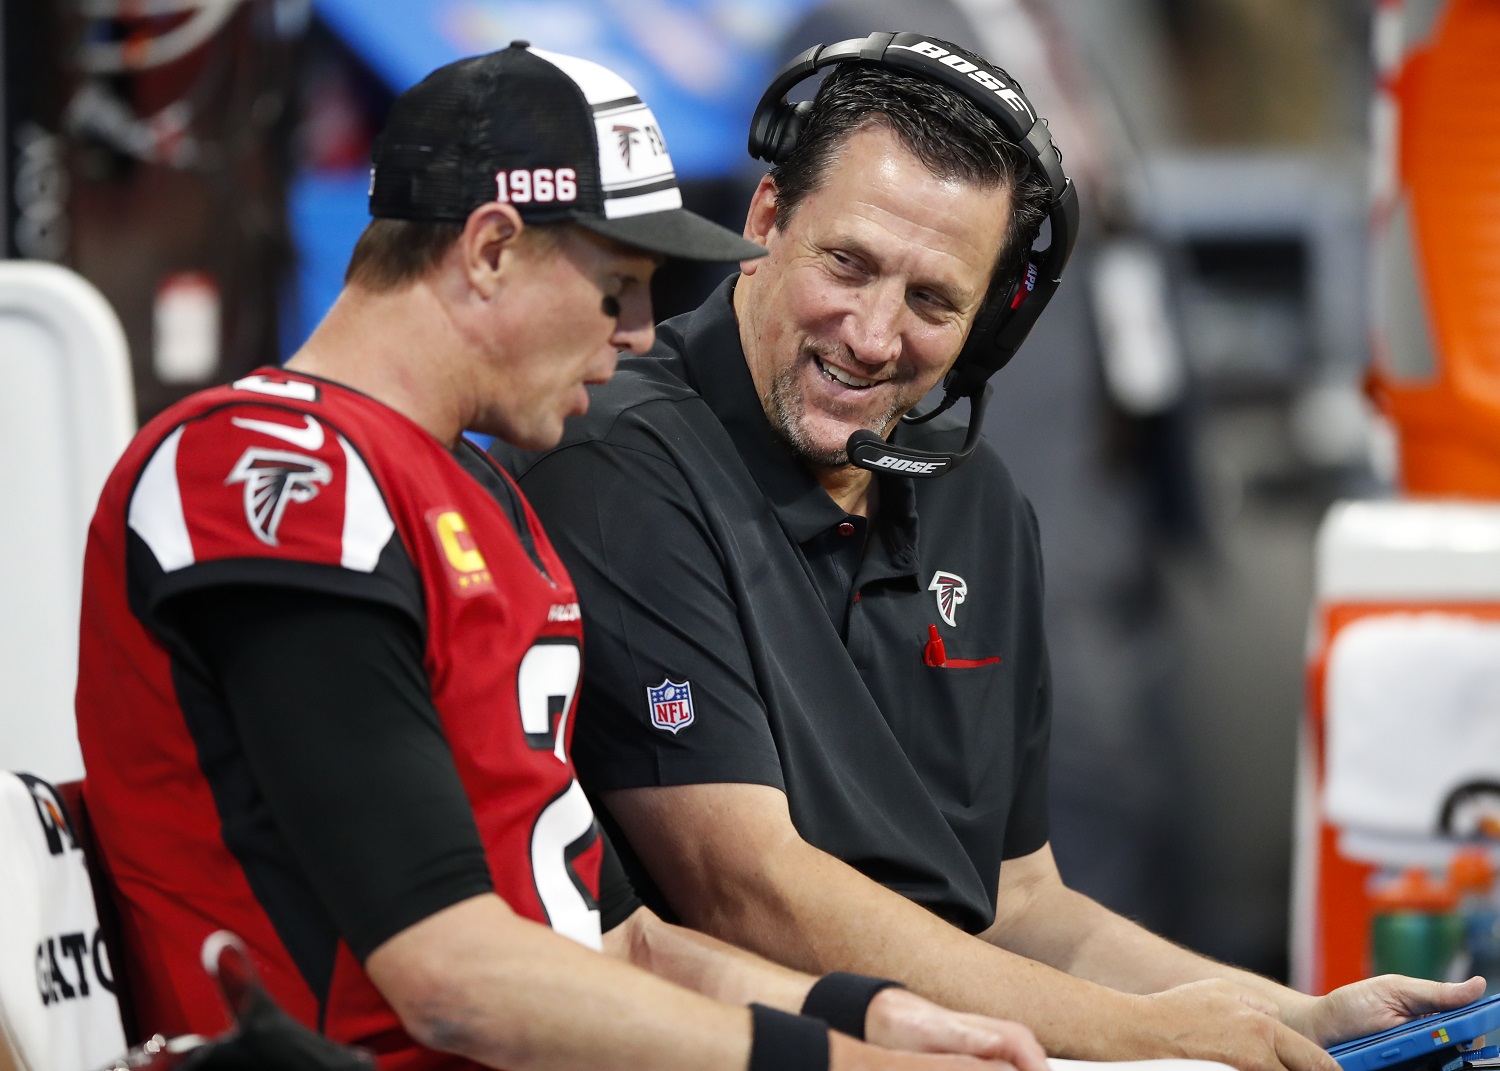 Quarterbacks coach Greg Knapp speaks with the Atlanta Falcons' Matt Ryan during the second half on an NFL game against the Carolina Panthers at Mercedes-Benz Stadium on Dec. 8, 2019. | Todd Kirkland/Getty Images